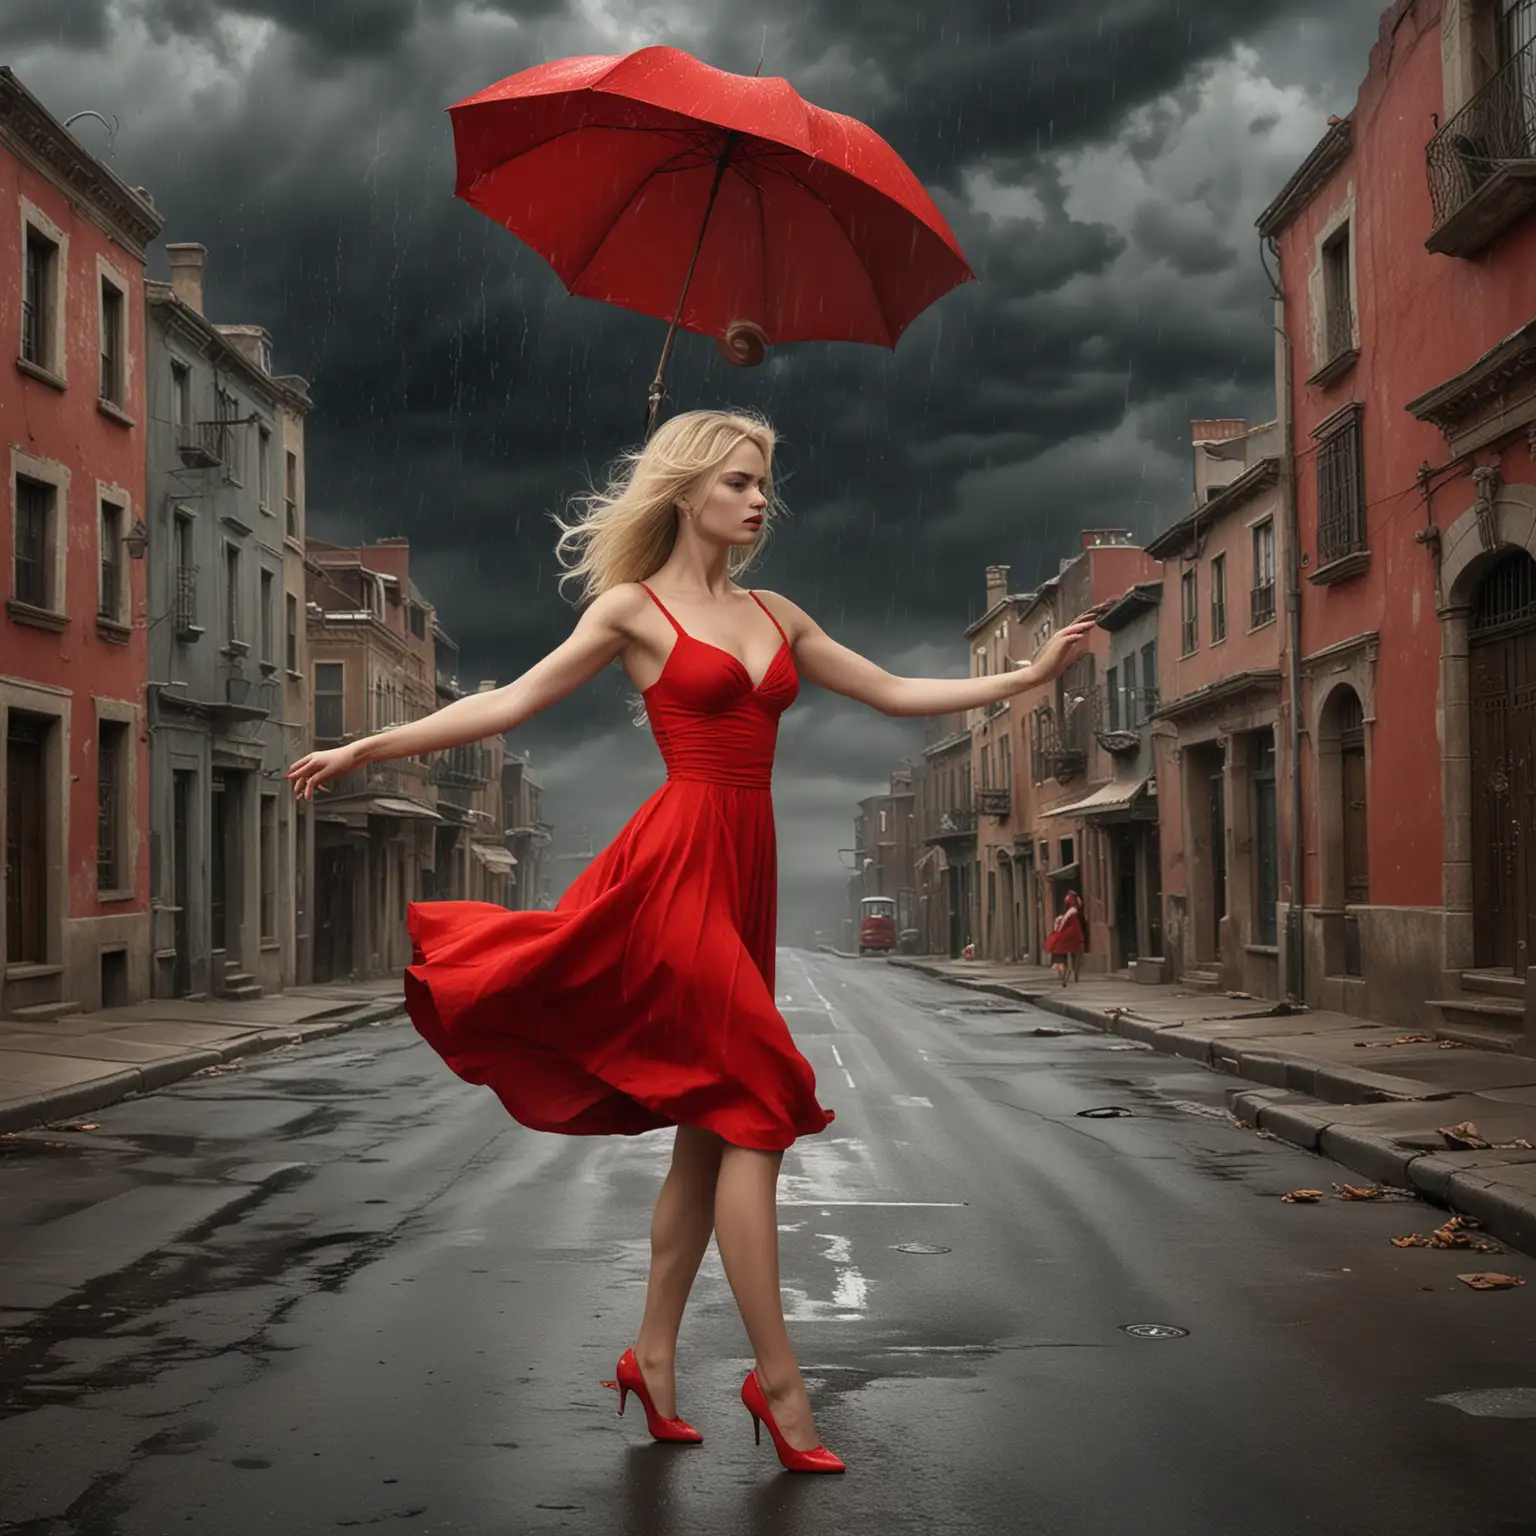 A realistic perfect surrealism photo of a beautiful woman with blonde hair in a red dress dancing in the street, with a dark storm approaching in the background, in the style of Max Ernst.